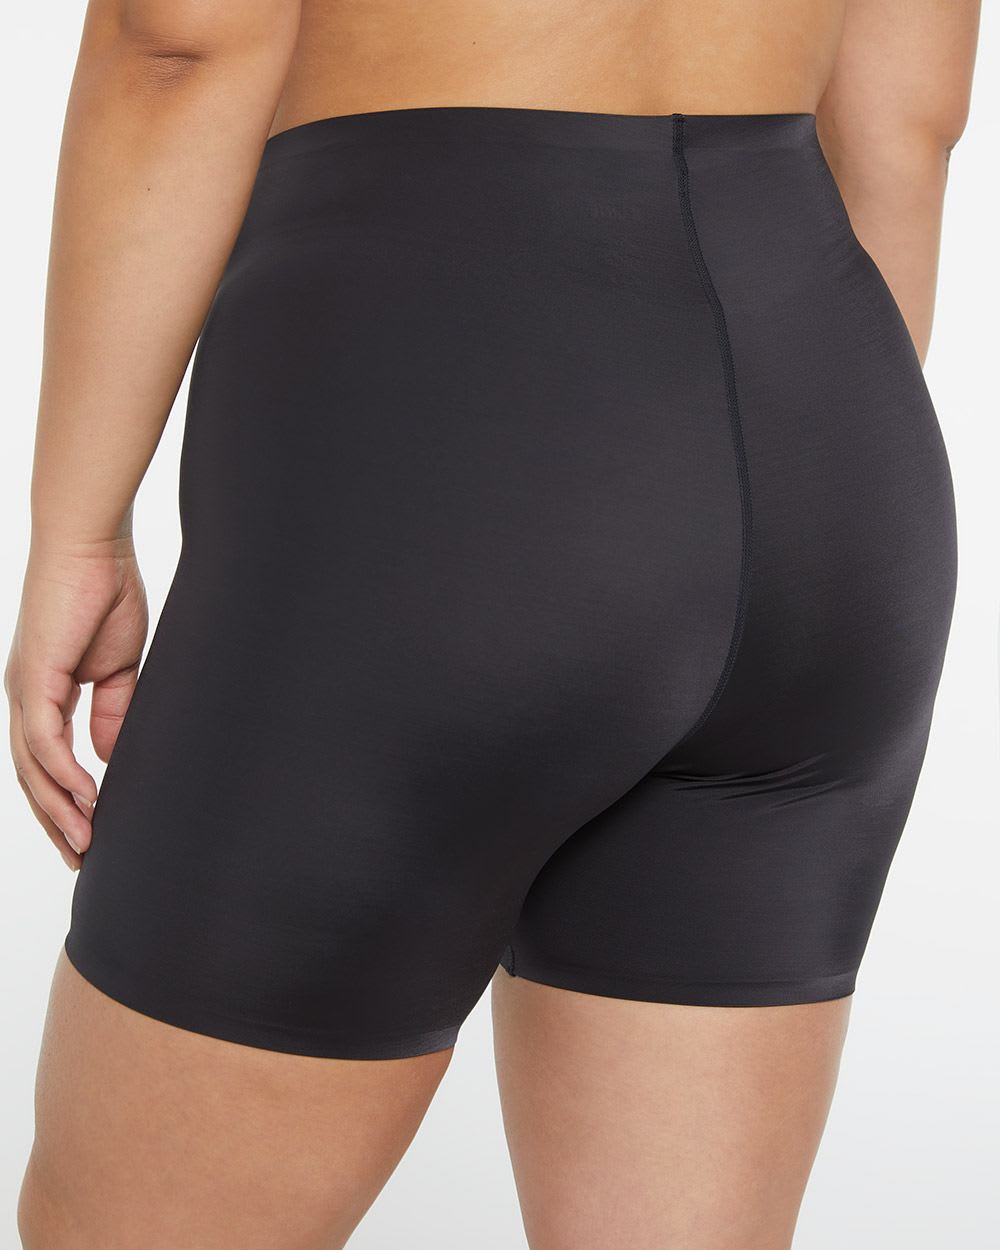 Extra Long Slip Short  Anti Thigh Chafing for Tall Women